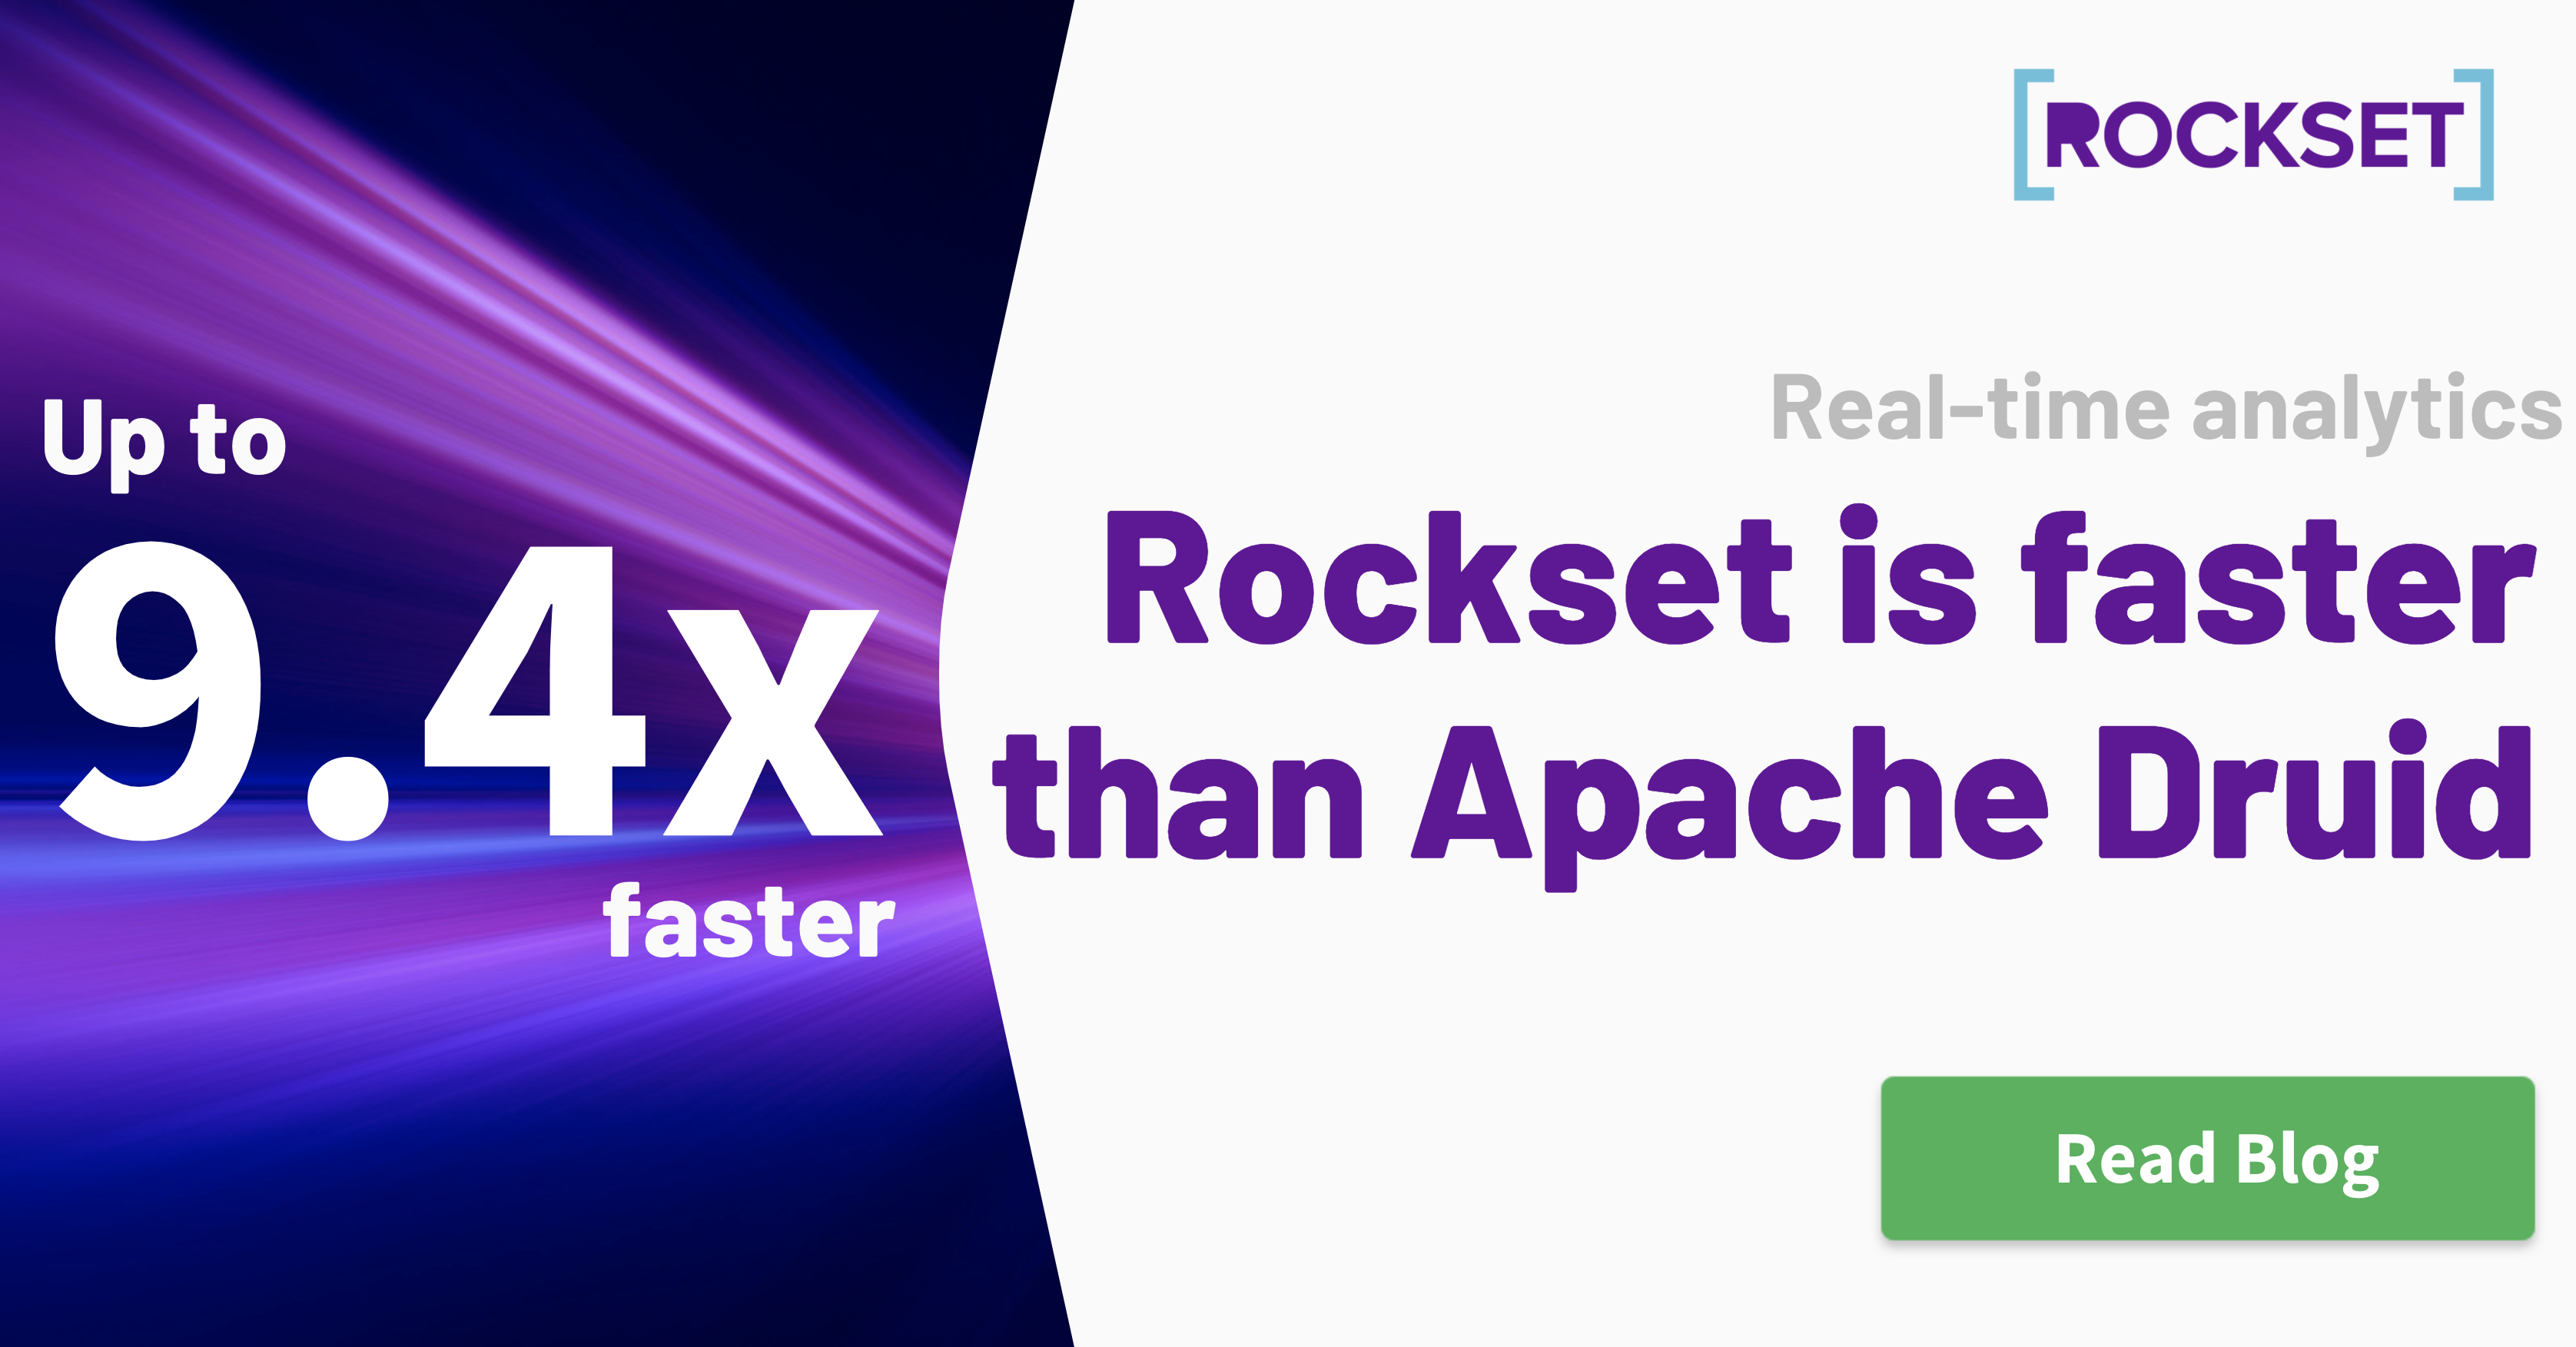 Rockset Is Up to 9.4x Faster than Apache Druid on the Star Schema Benchmark